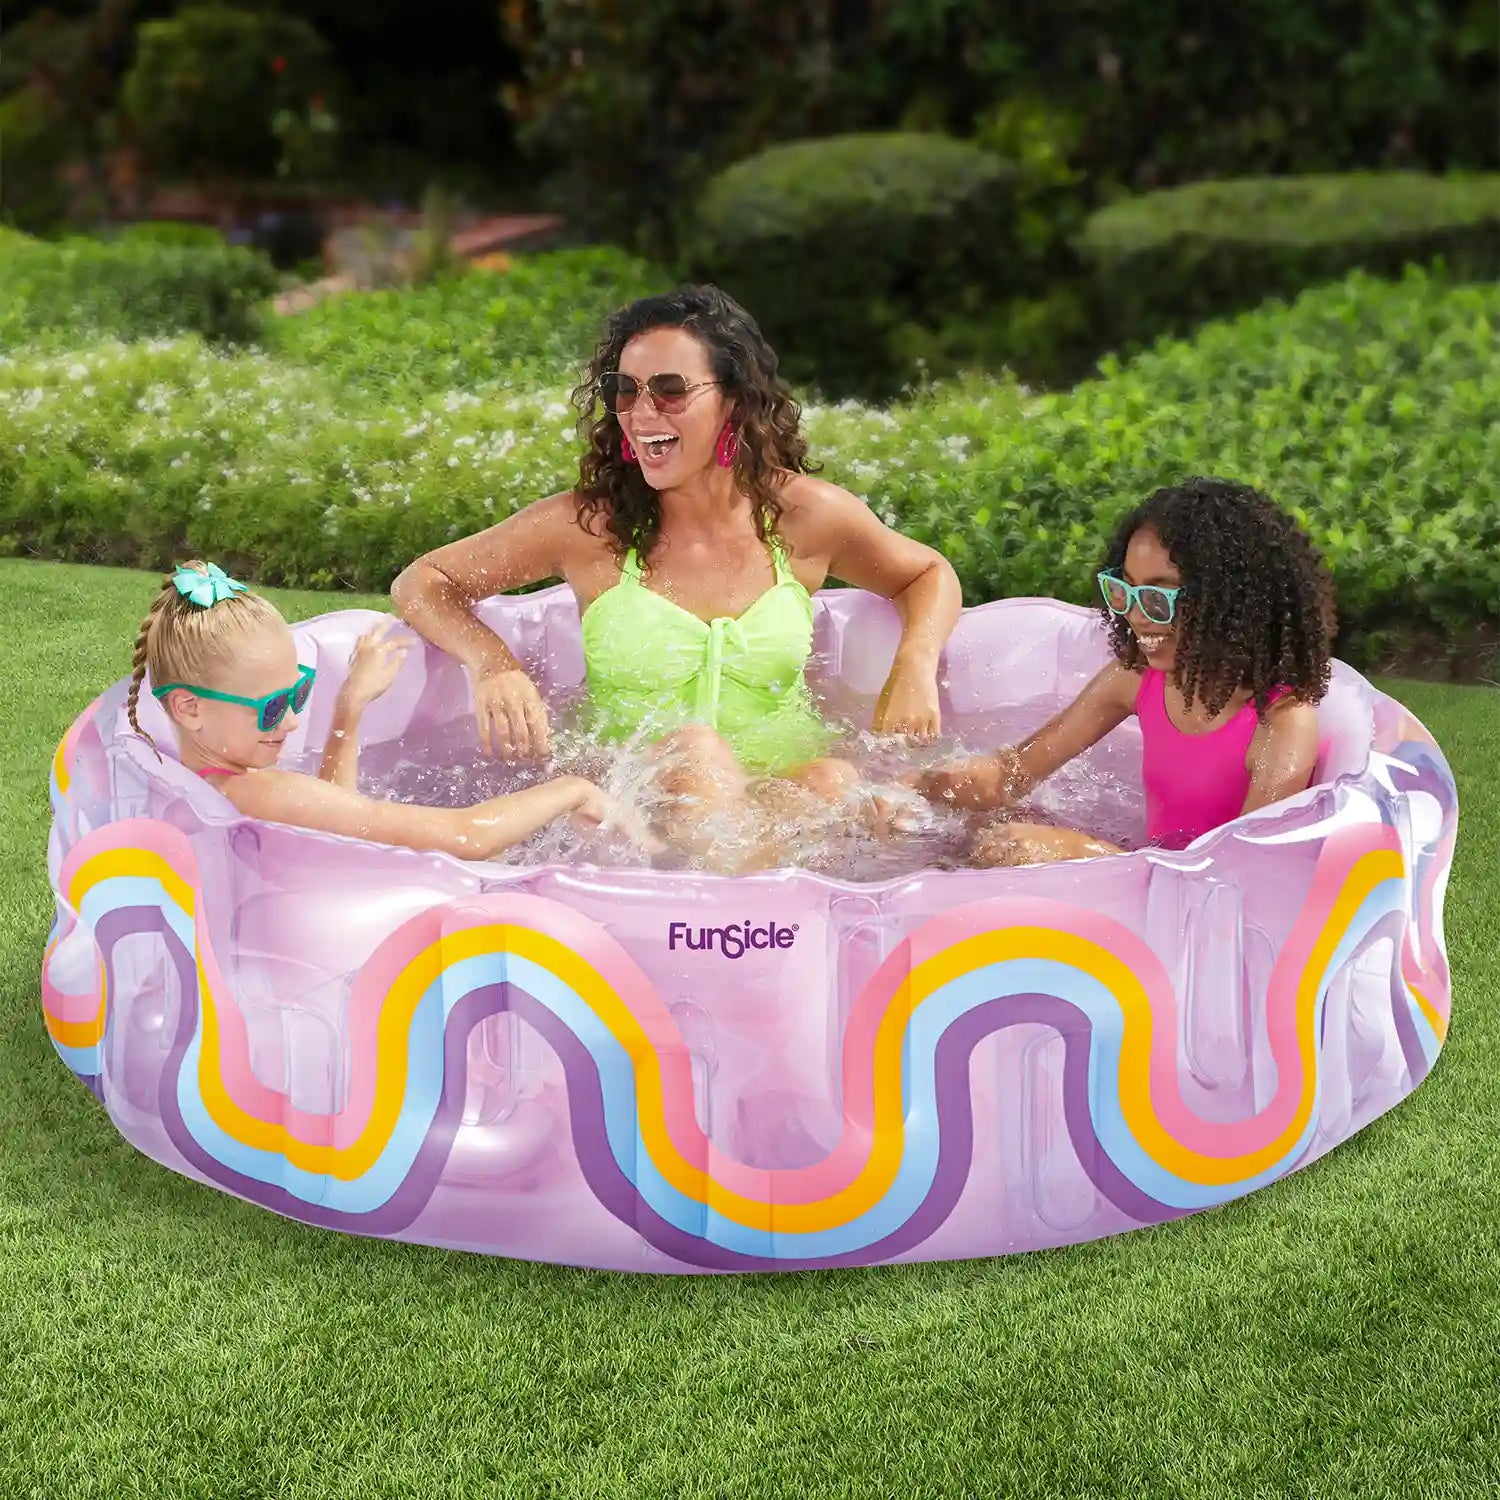 Mother watching over her kids playing inside Funsicle Wavy Rainbow Funcuzzi Pool on grass field